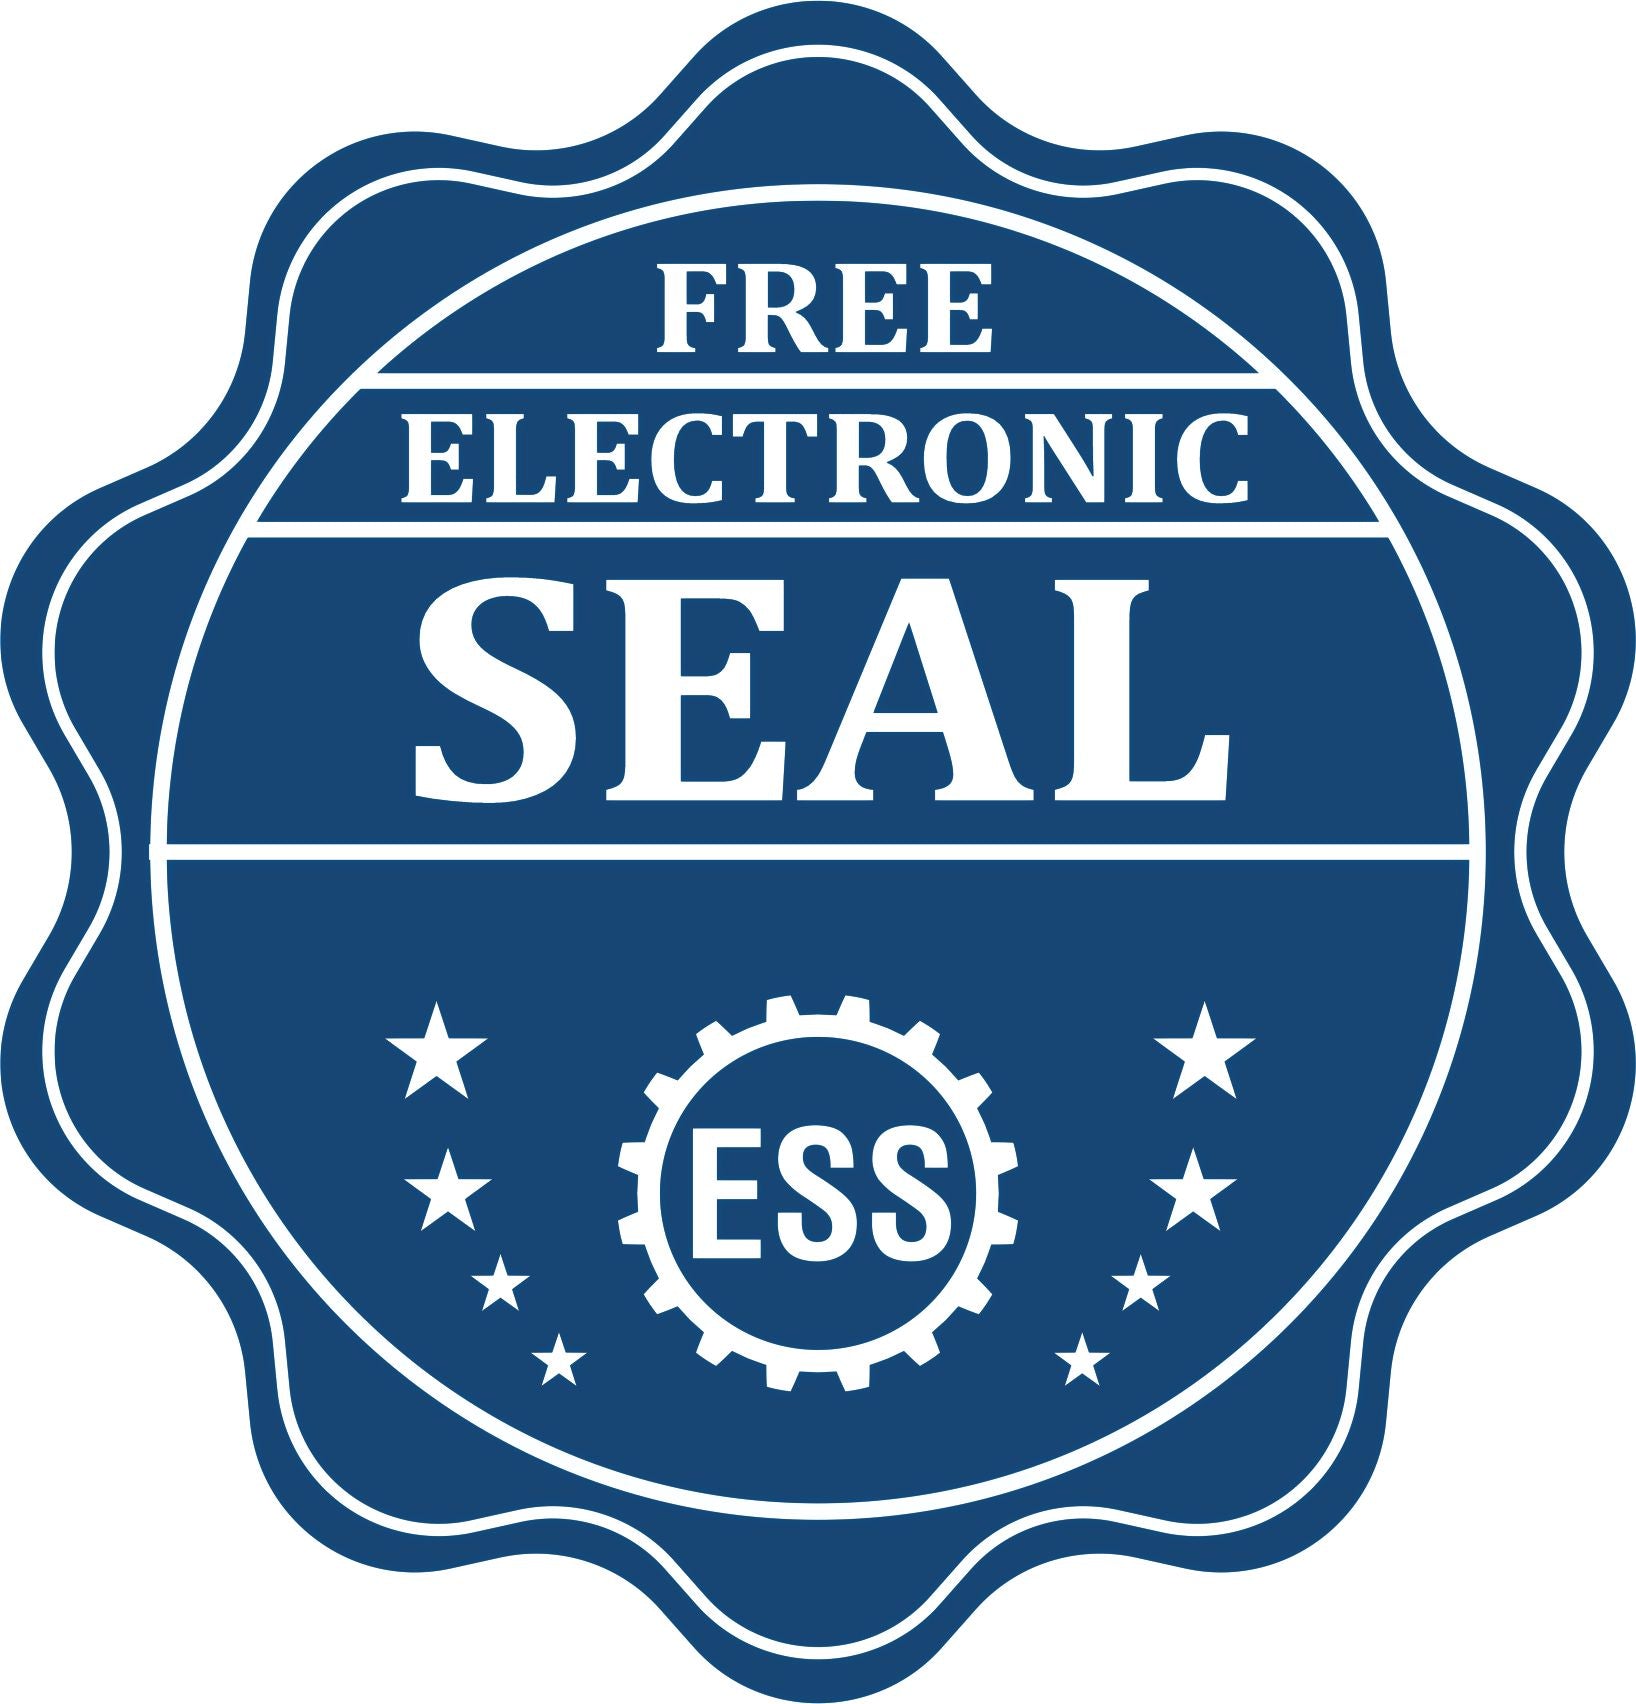 A badge showing a free electronic seal for the Ohio Professional Engineer Seal Stamp with stars and the ESS gear on the emblem.